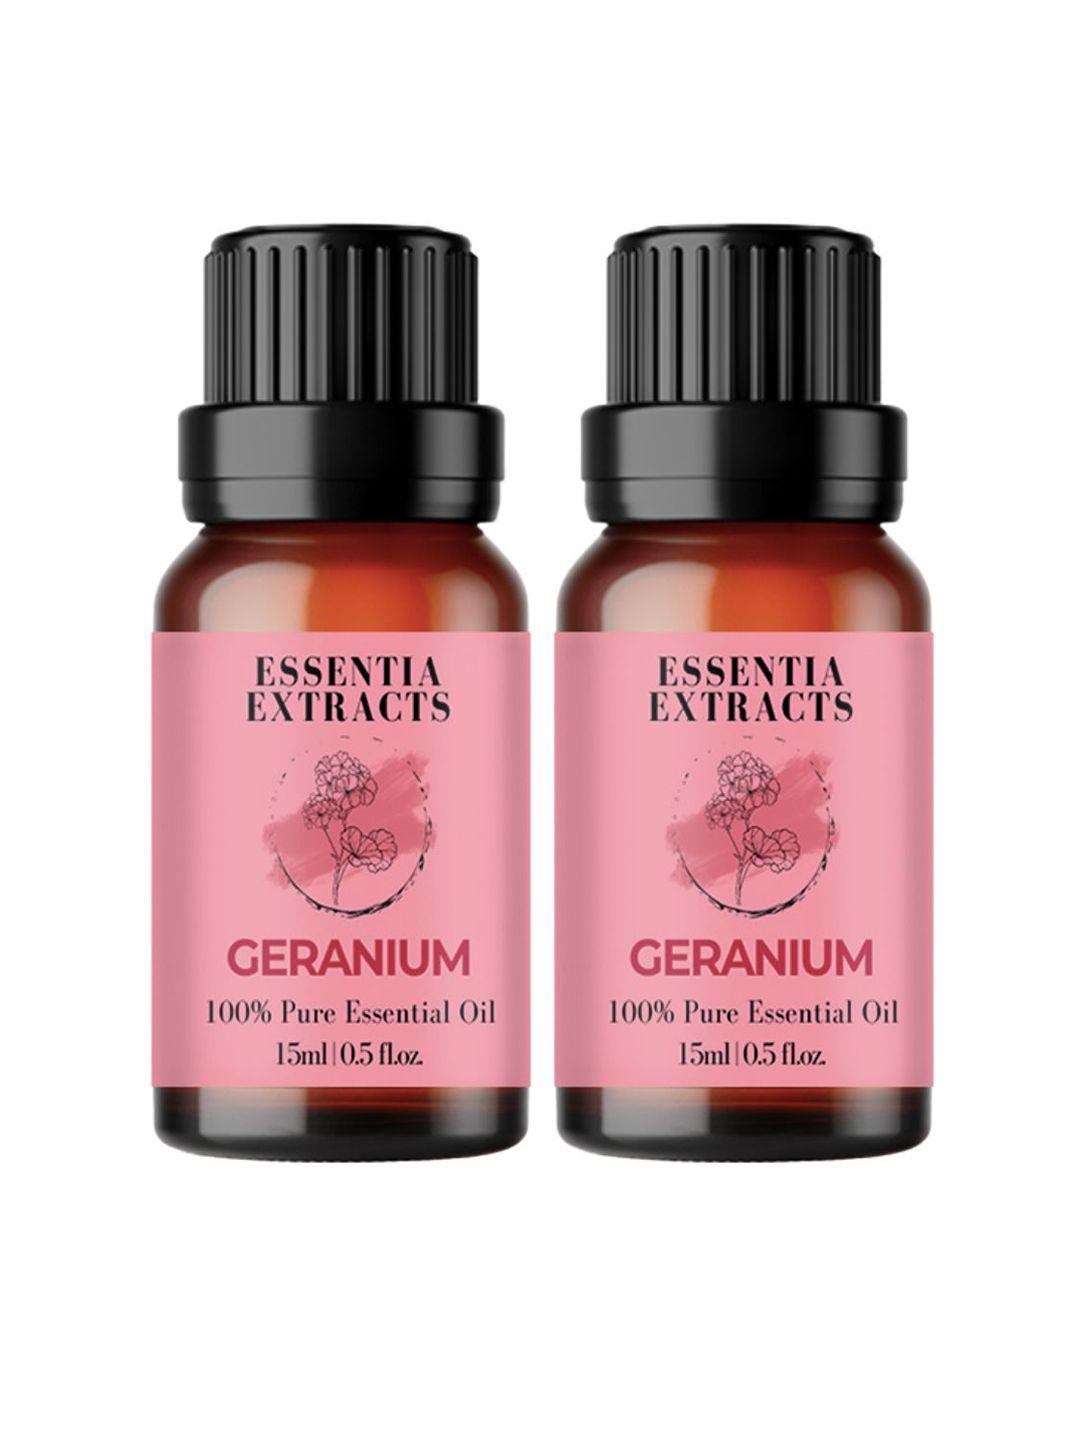 essentia extracts set of 2 pure geranium essential oils to fight acne breakouts- 15ml each